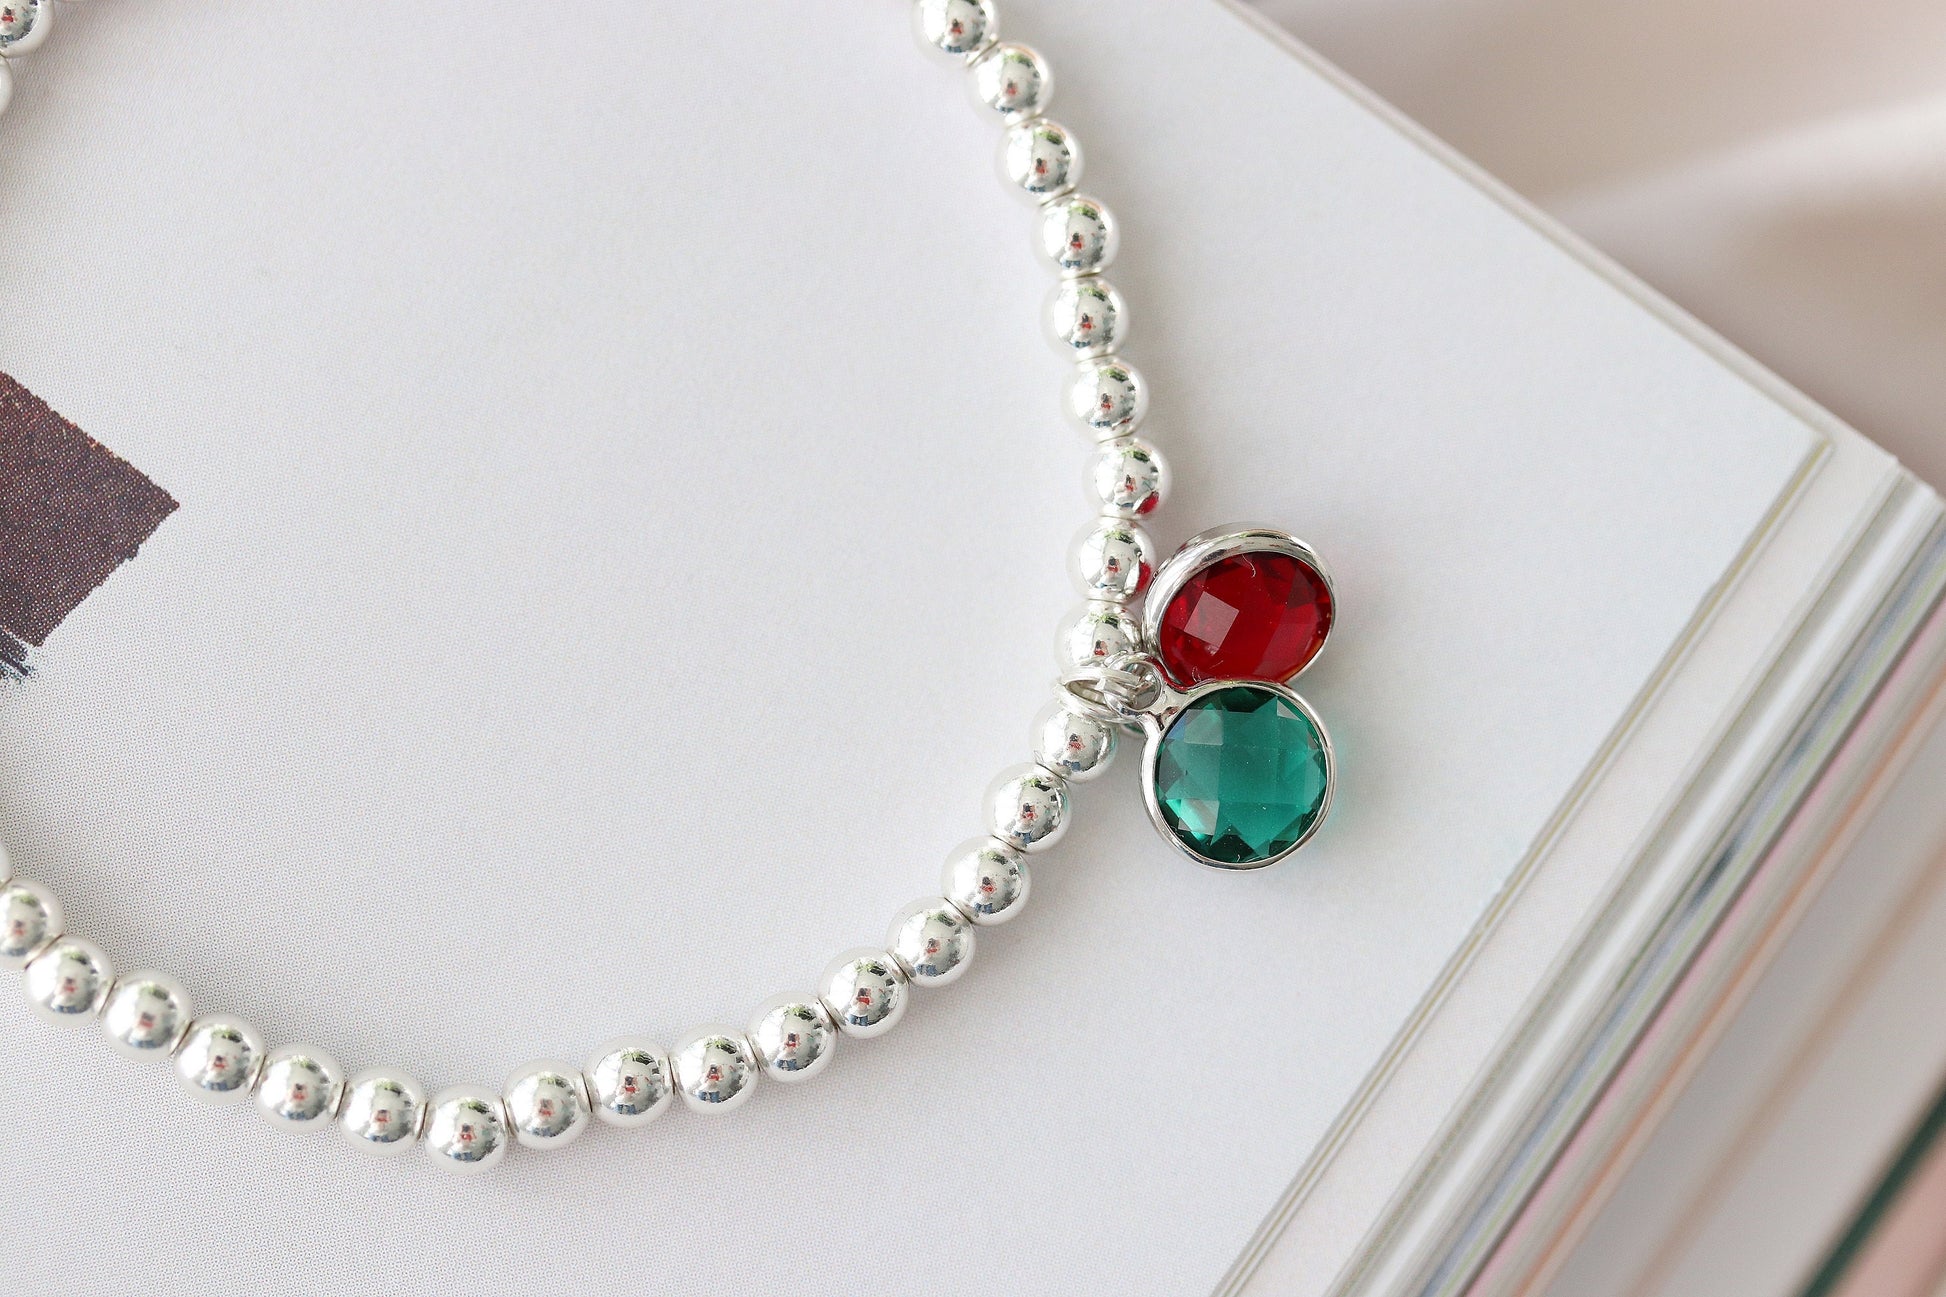 Personalised Initial Silver Bracelet, Sterling Silver Plated Beaded Elastic Birthstone Bracelet, Gift for Mum, Mother's Day Gift for her